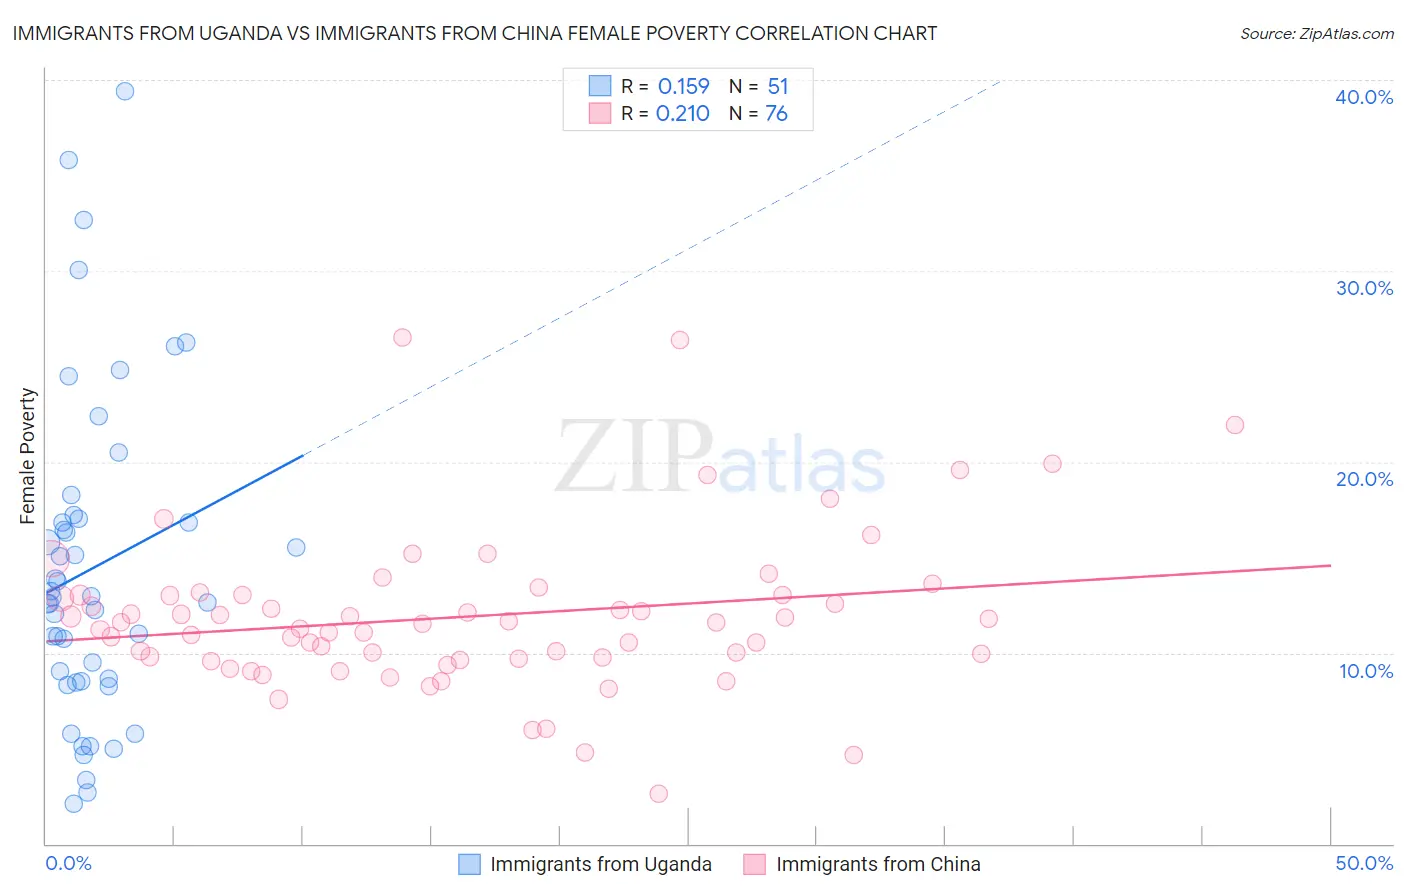 Immigrants from Uganda vs Immigrants from China Female Poverty